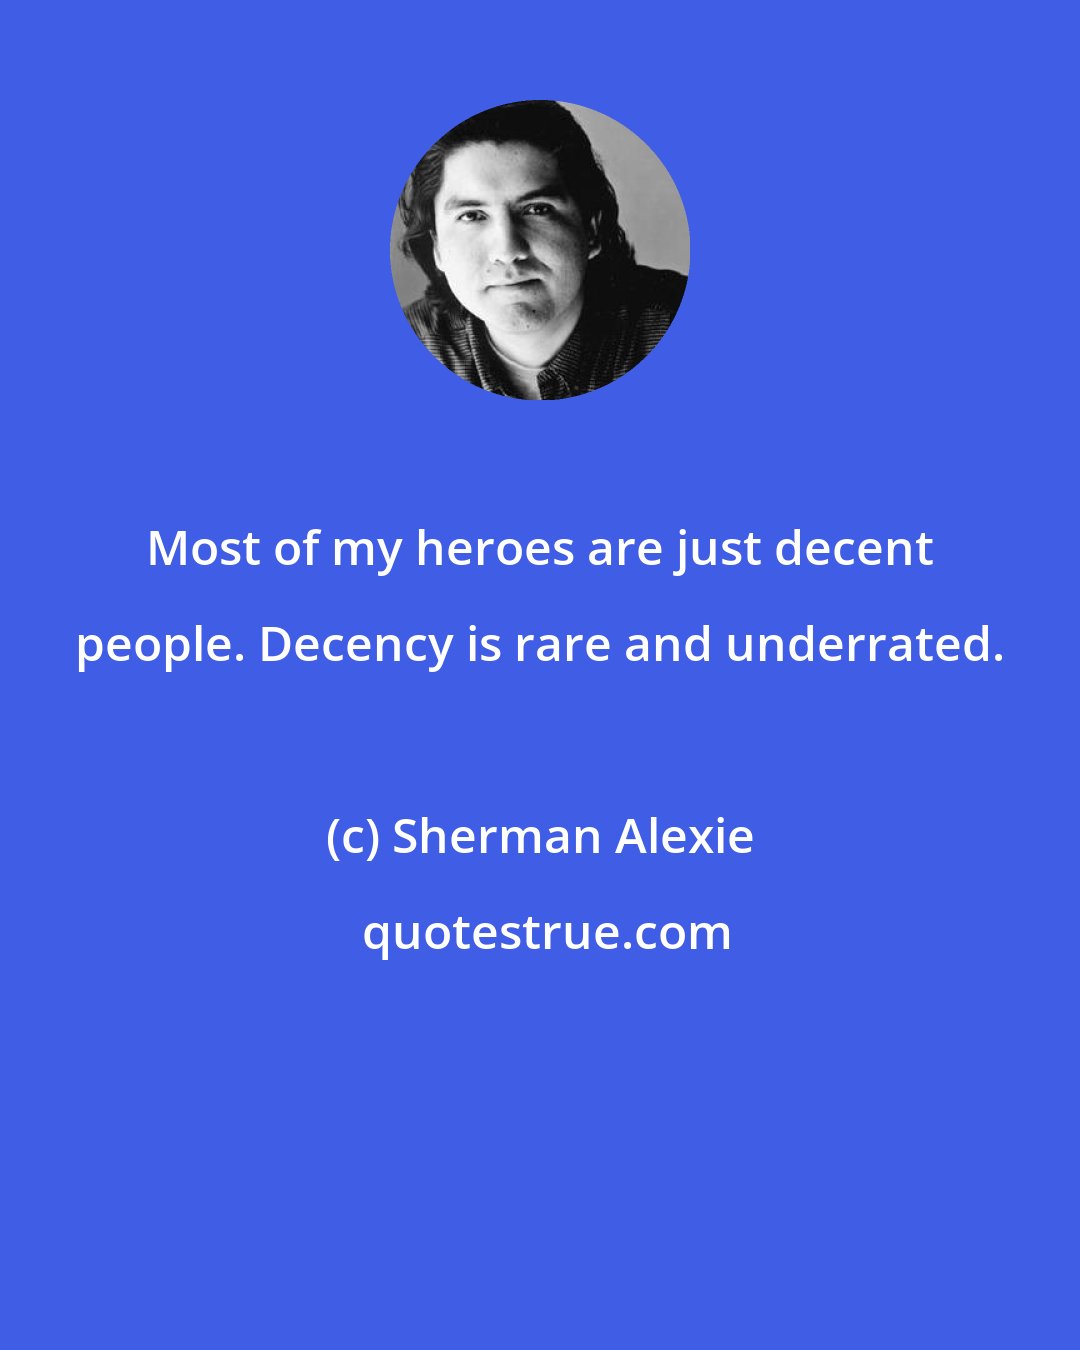 Sherman Alexie: Most of my heroes are just decent people. Decency is rare and underrated.